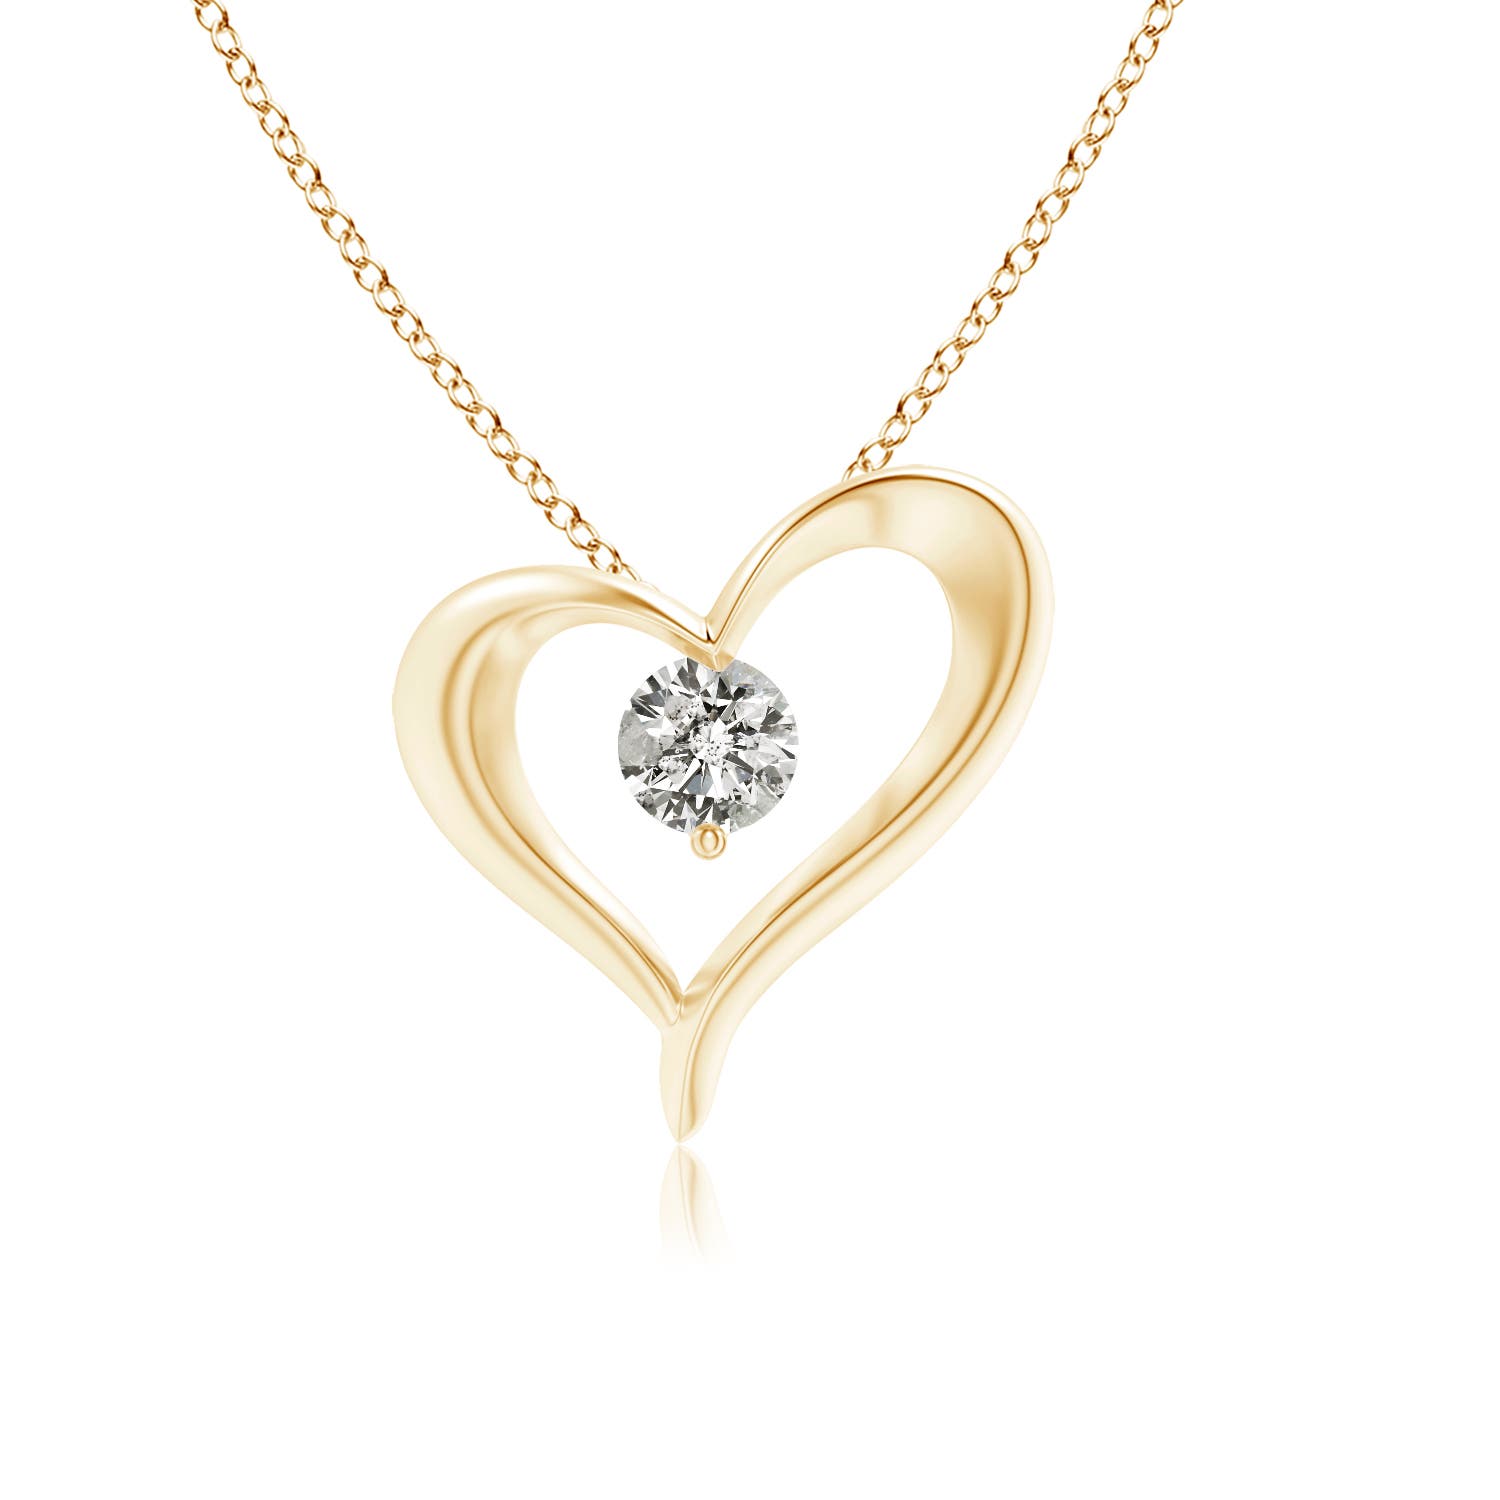 K, I3 / 0.2 CT / 14 KT Yellow Gold